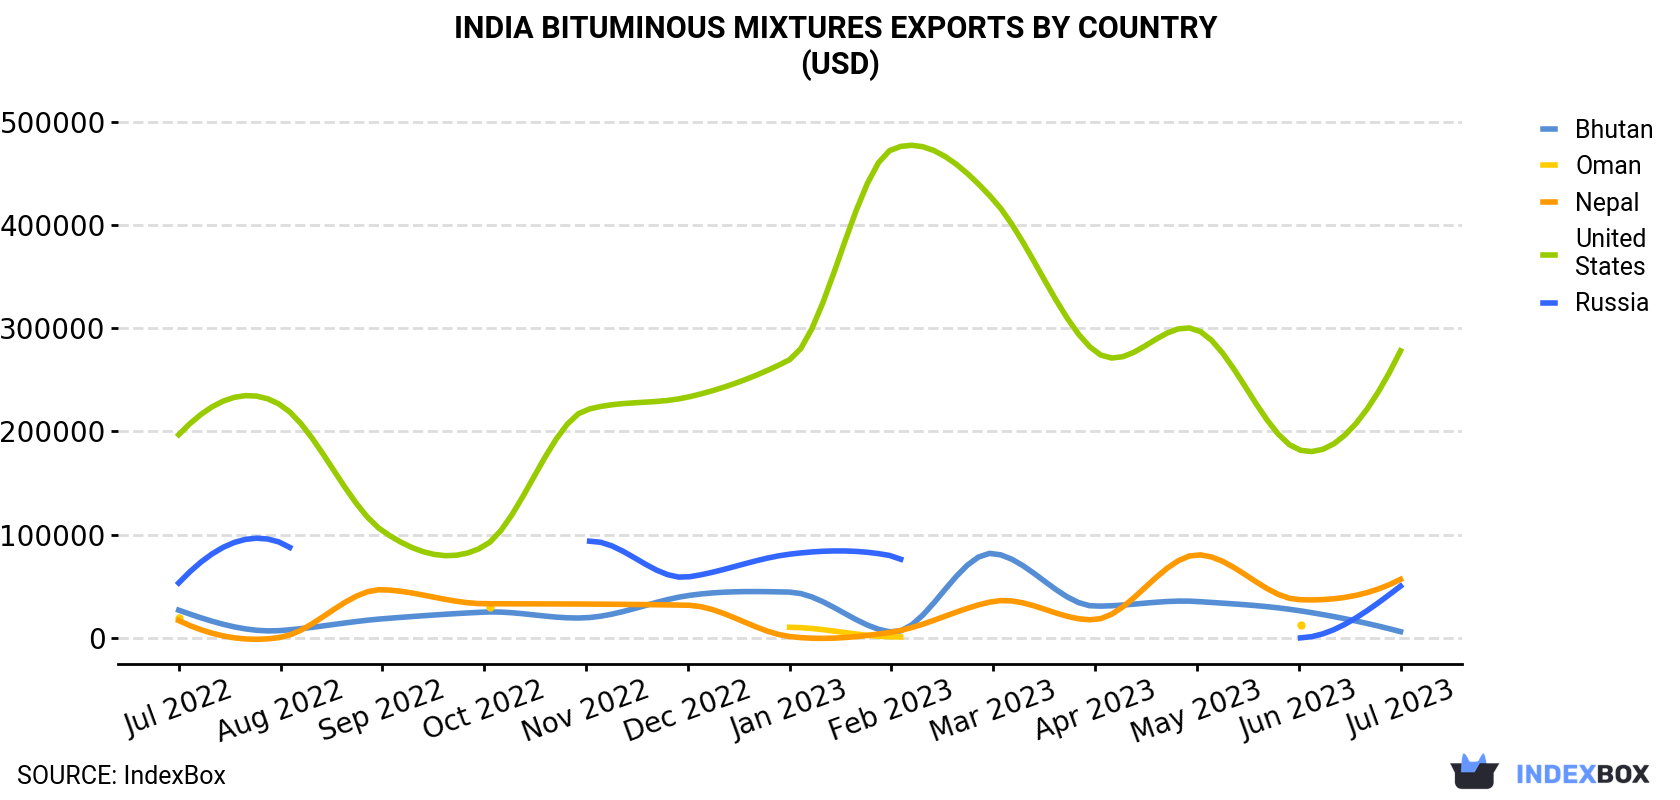 India Bituminous Mixtures Exports By Country (USD)